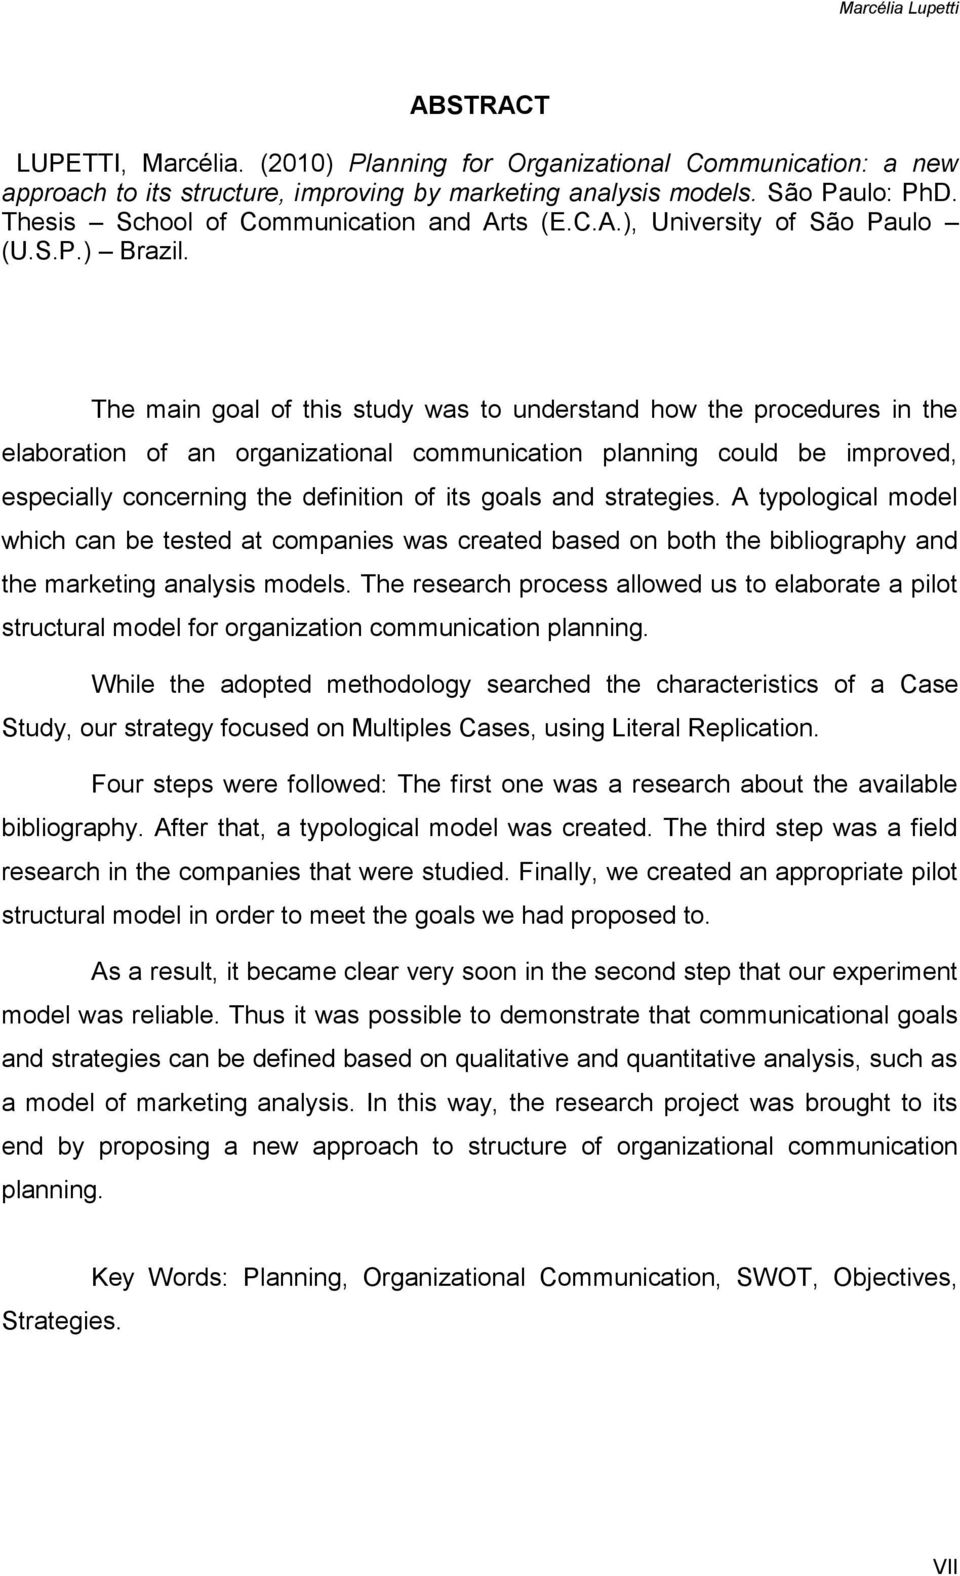 The main goal of this study was to understand how the procedures in the elaboration of an organizational communication planning could be improved, especially concerning the definition of its goals